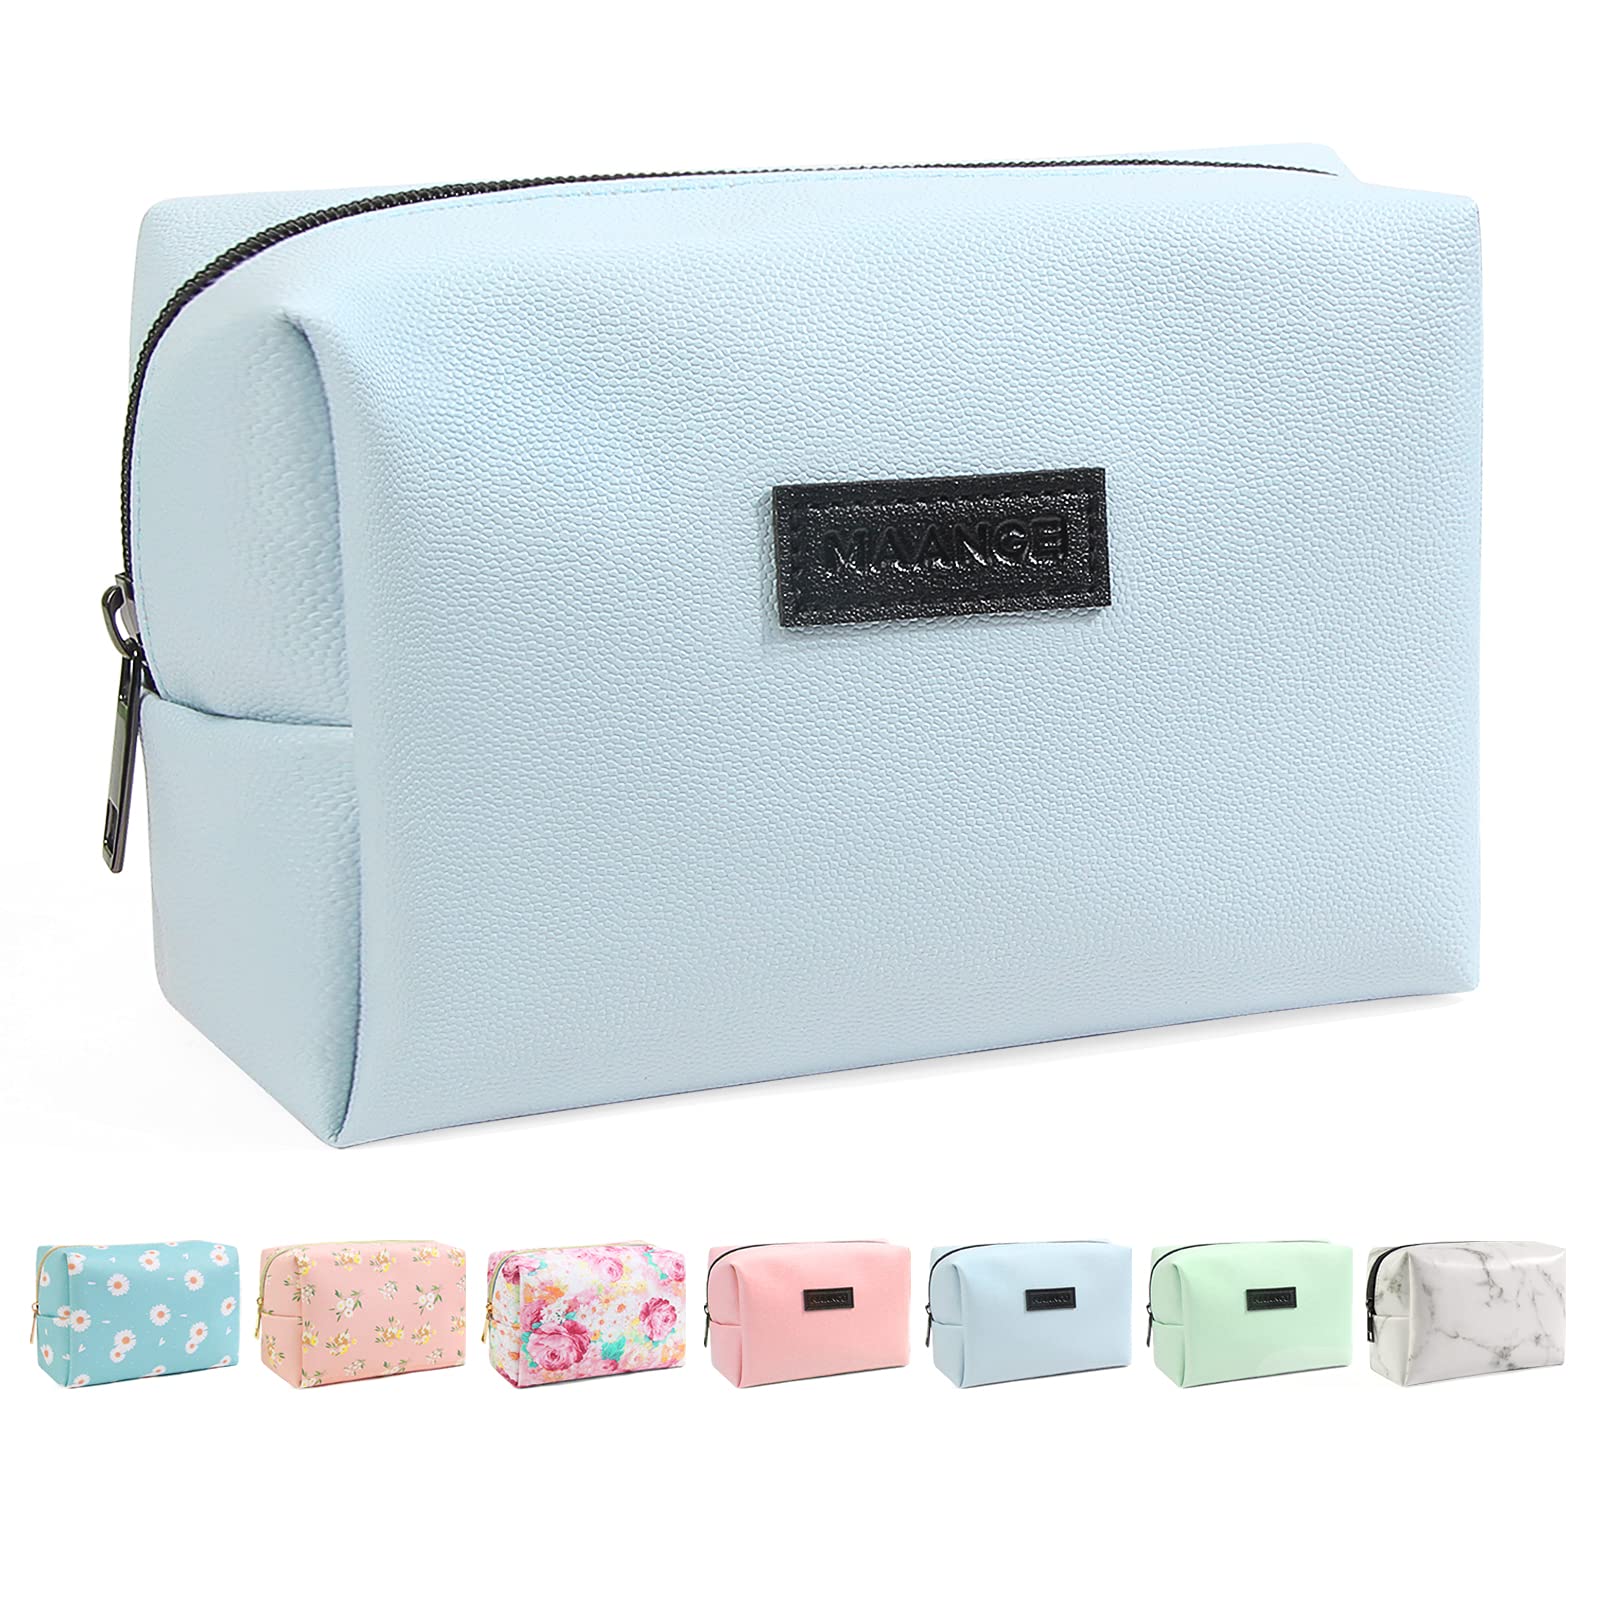 Travelwant Cosmetic Bags for Women Small Makeup Bag with Zipper PU Leather Makeup Pouch Makeup Bag for Purse Make Up Bag for Travelling, Blue